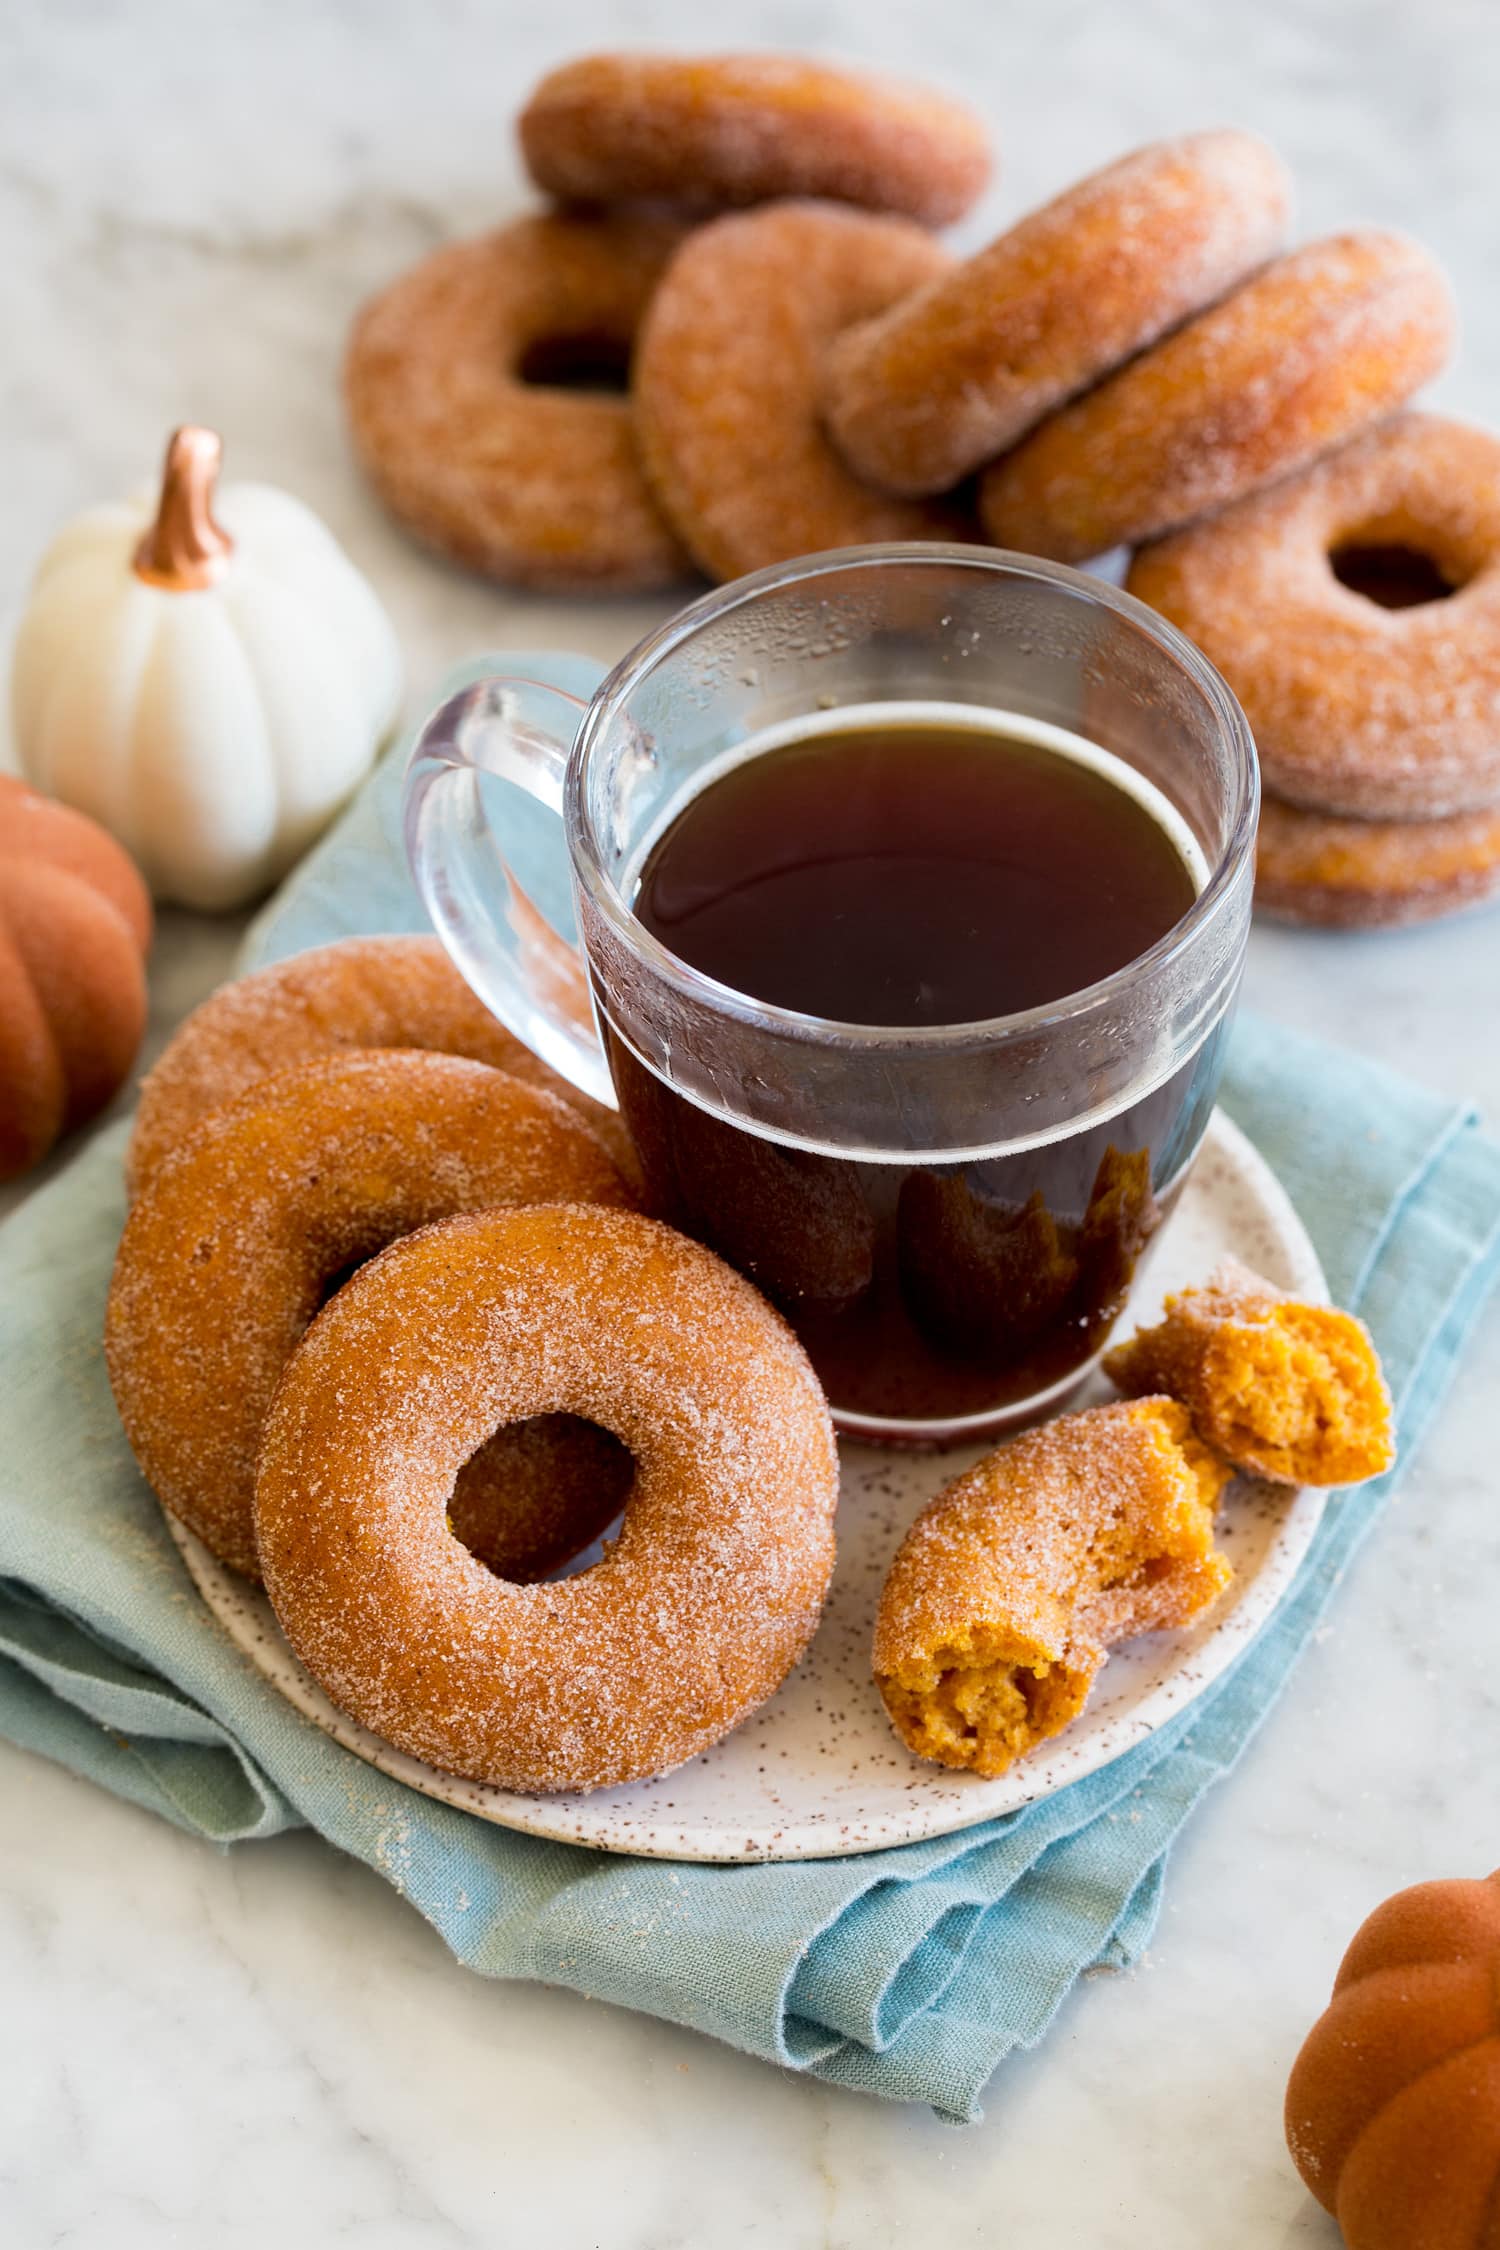 Baked donuts served with a cup of coffee.